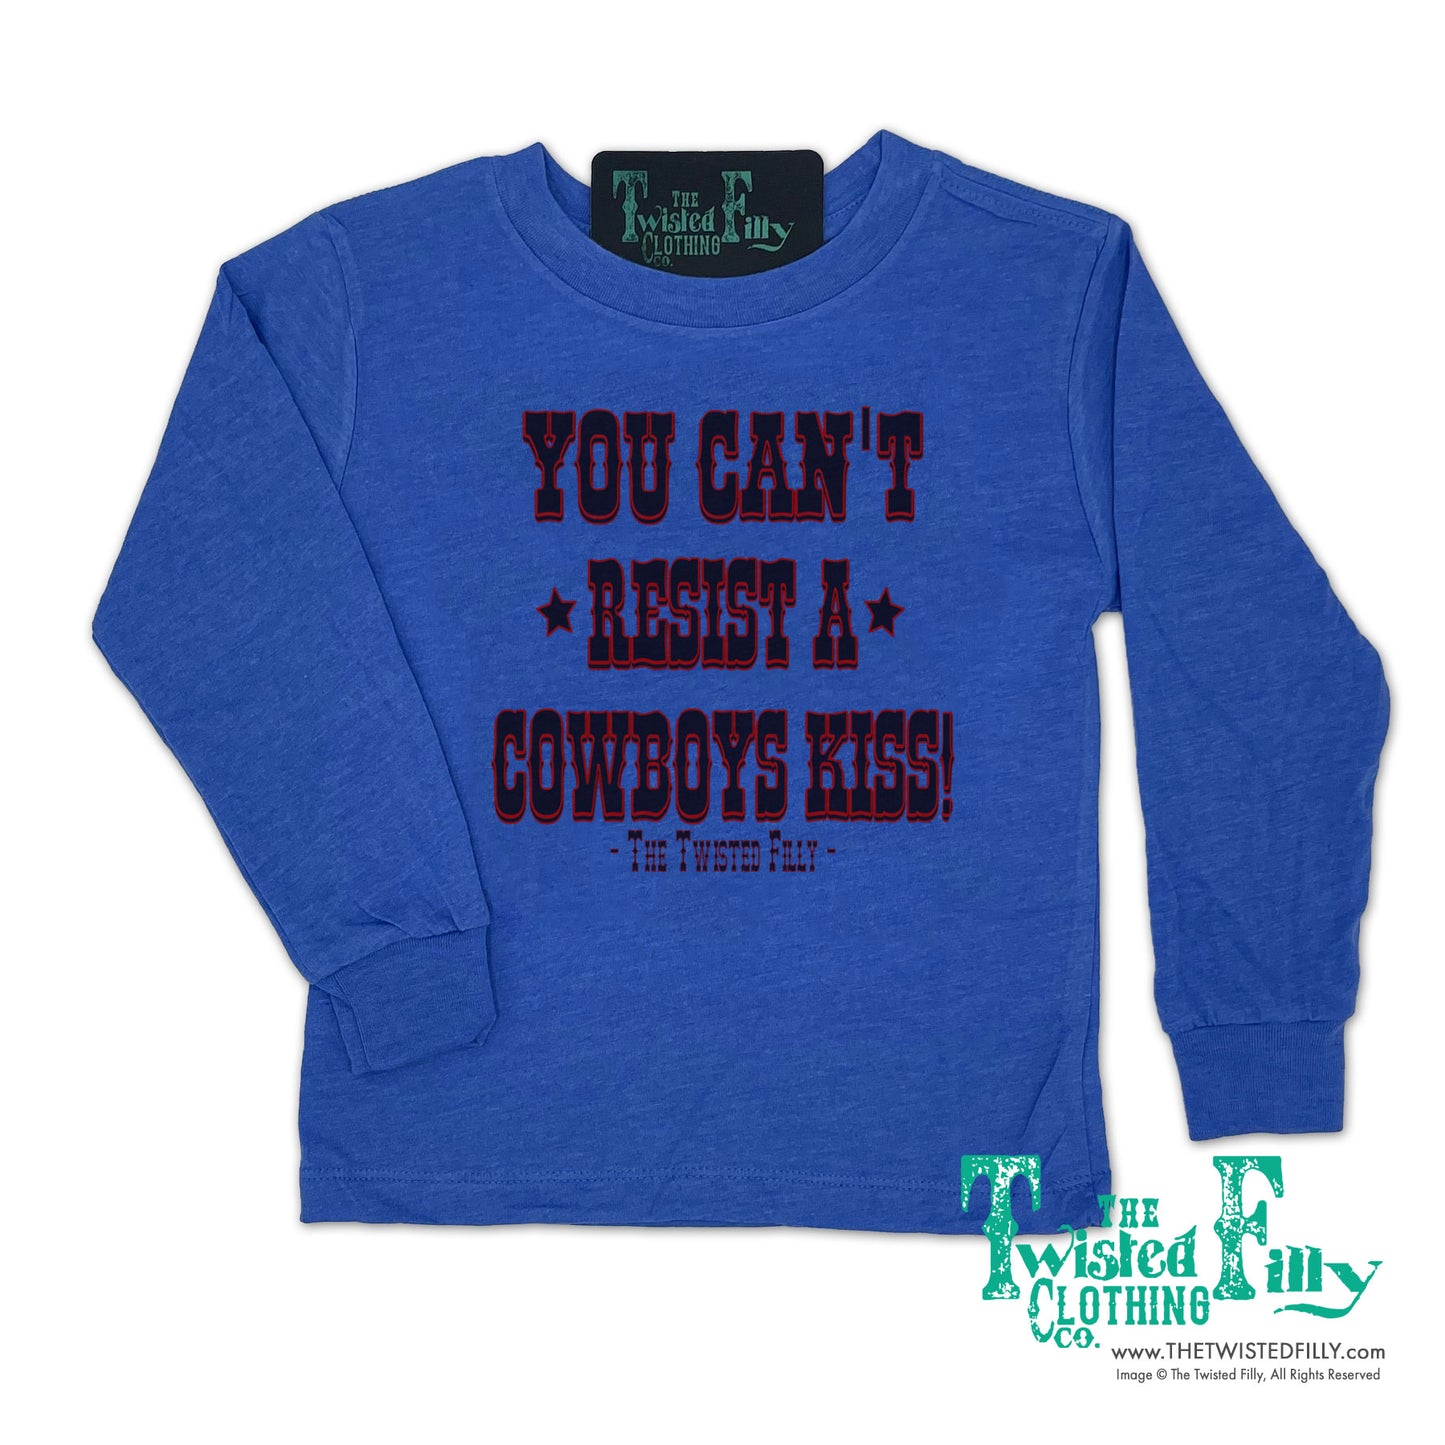 You Can't Resist A Cowboys Kiss - L/S Toddler Tee - Dark Blue